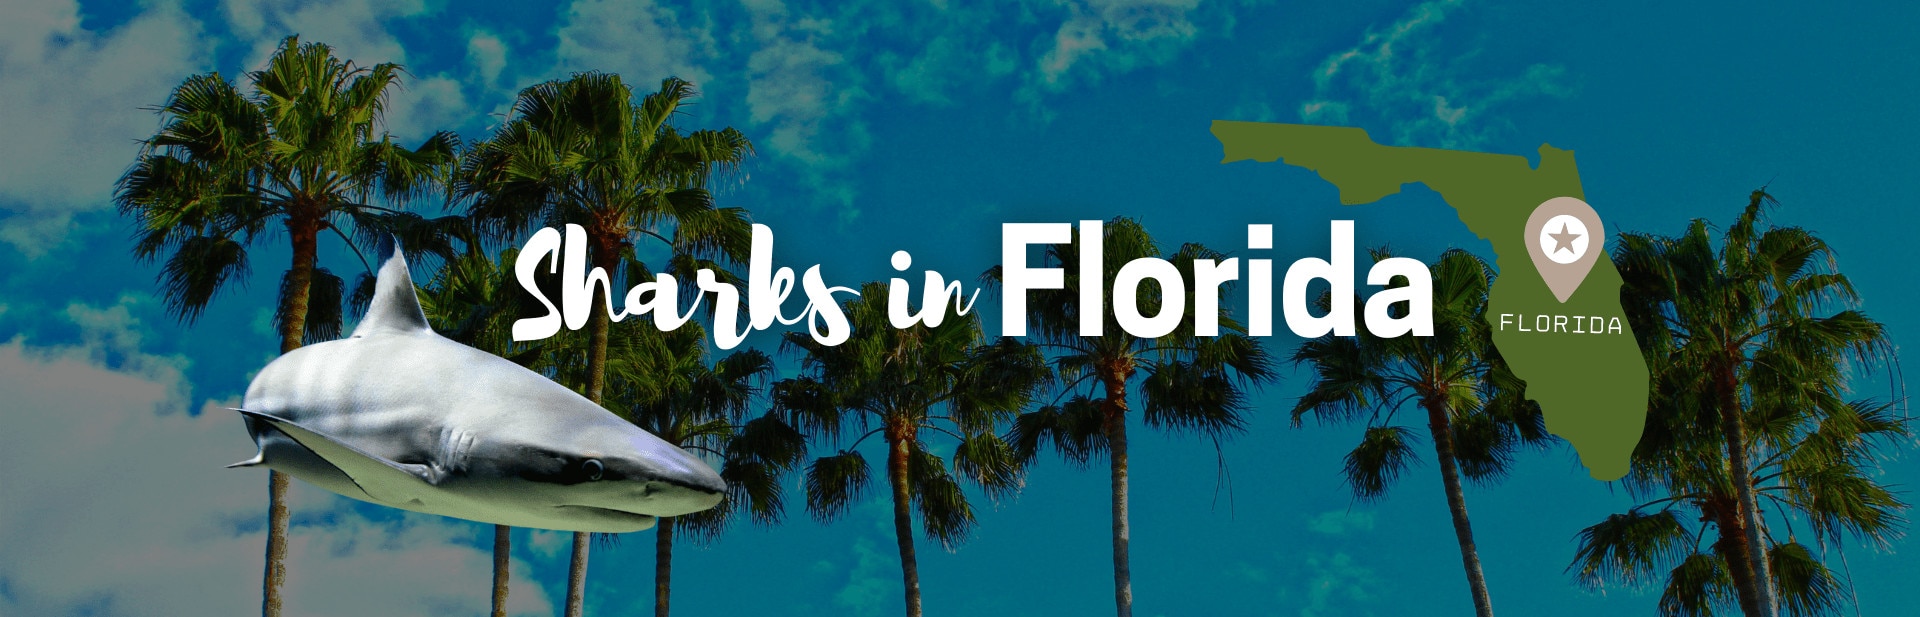 Sharks in Florida: All You Ought to Know (Pics, Facts and Chart)